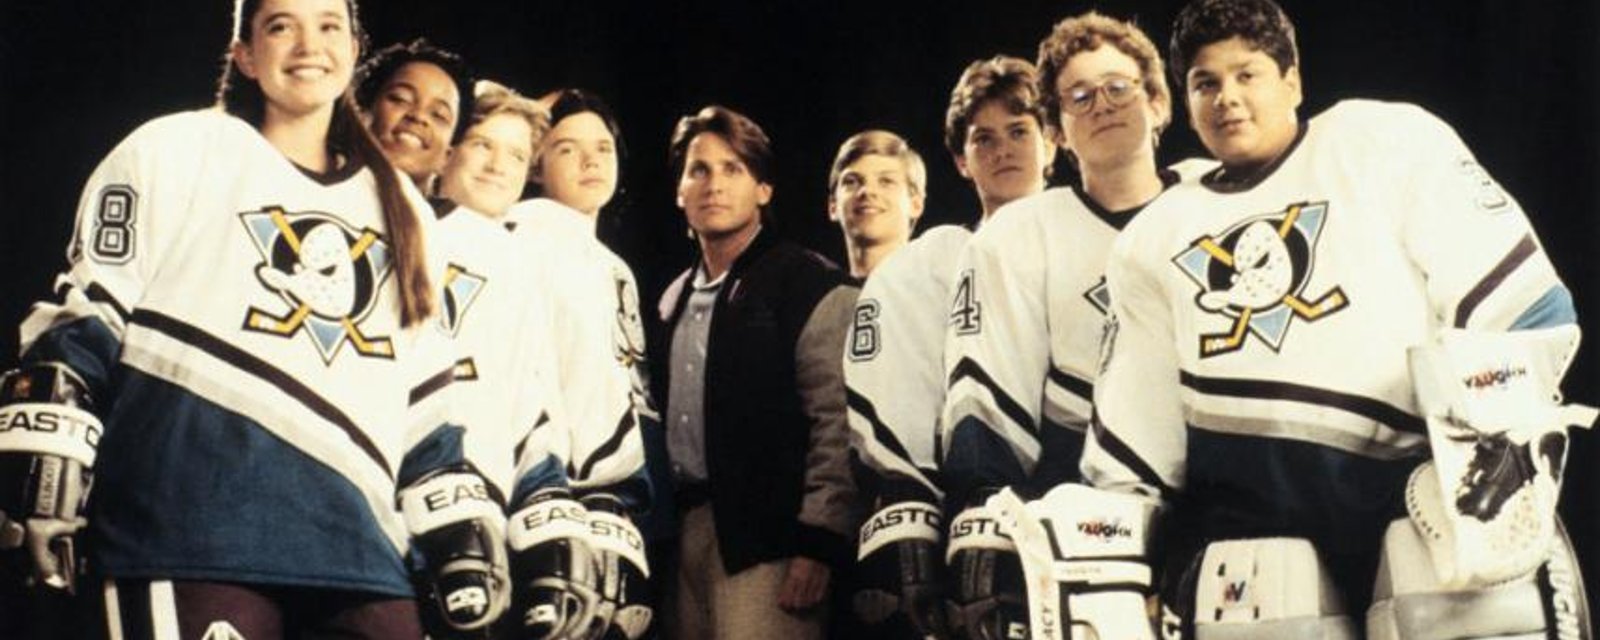 Breaking: Mighty Ducks Star arrested for theft